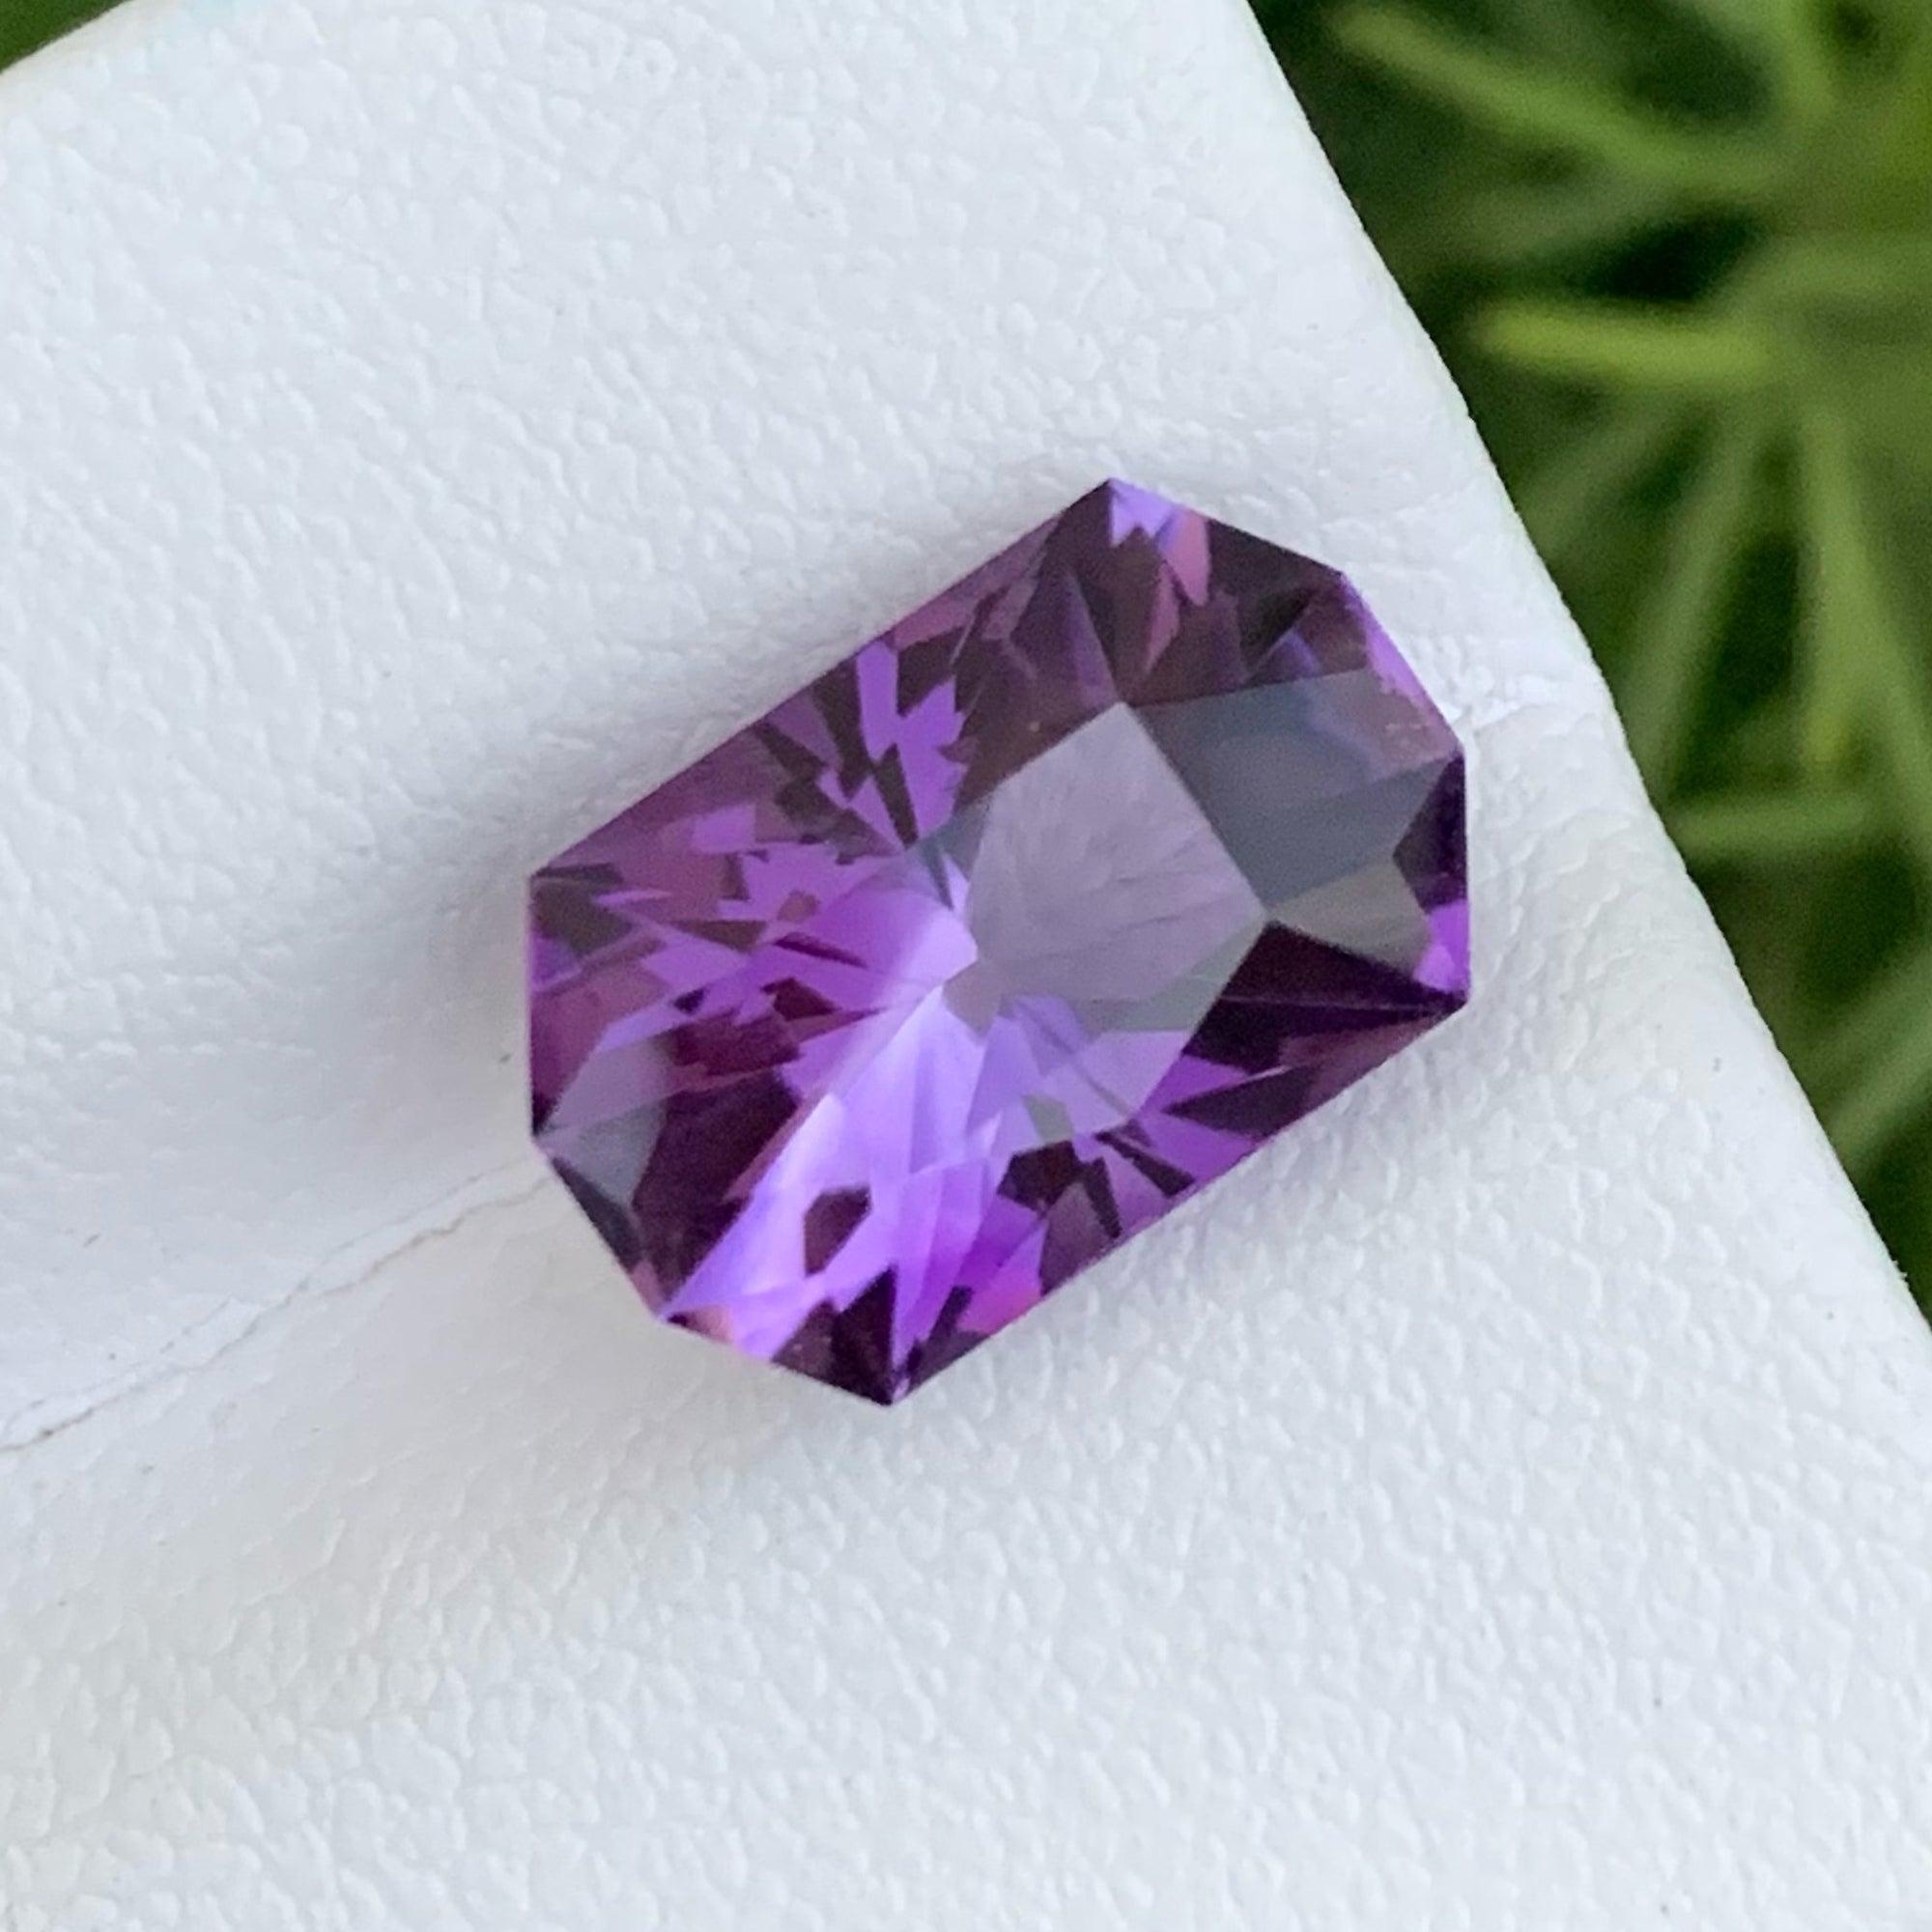 Exquisite Fancy Cut Loose Amethyst Gemstone, Available for sale at wholesale price natural high quality at 4.35 Carats Eye Clean Clarity Unheated Natural Amethyst From Brazil.
 
Product Information:
GEMSTONE TYPE:	Exquisite Fancy Cut Loose Amethyst